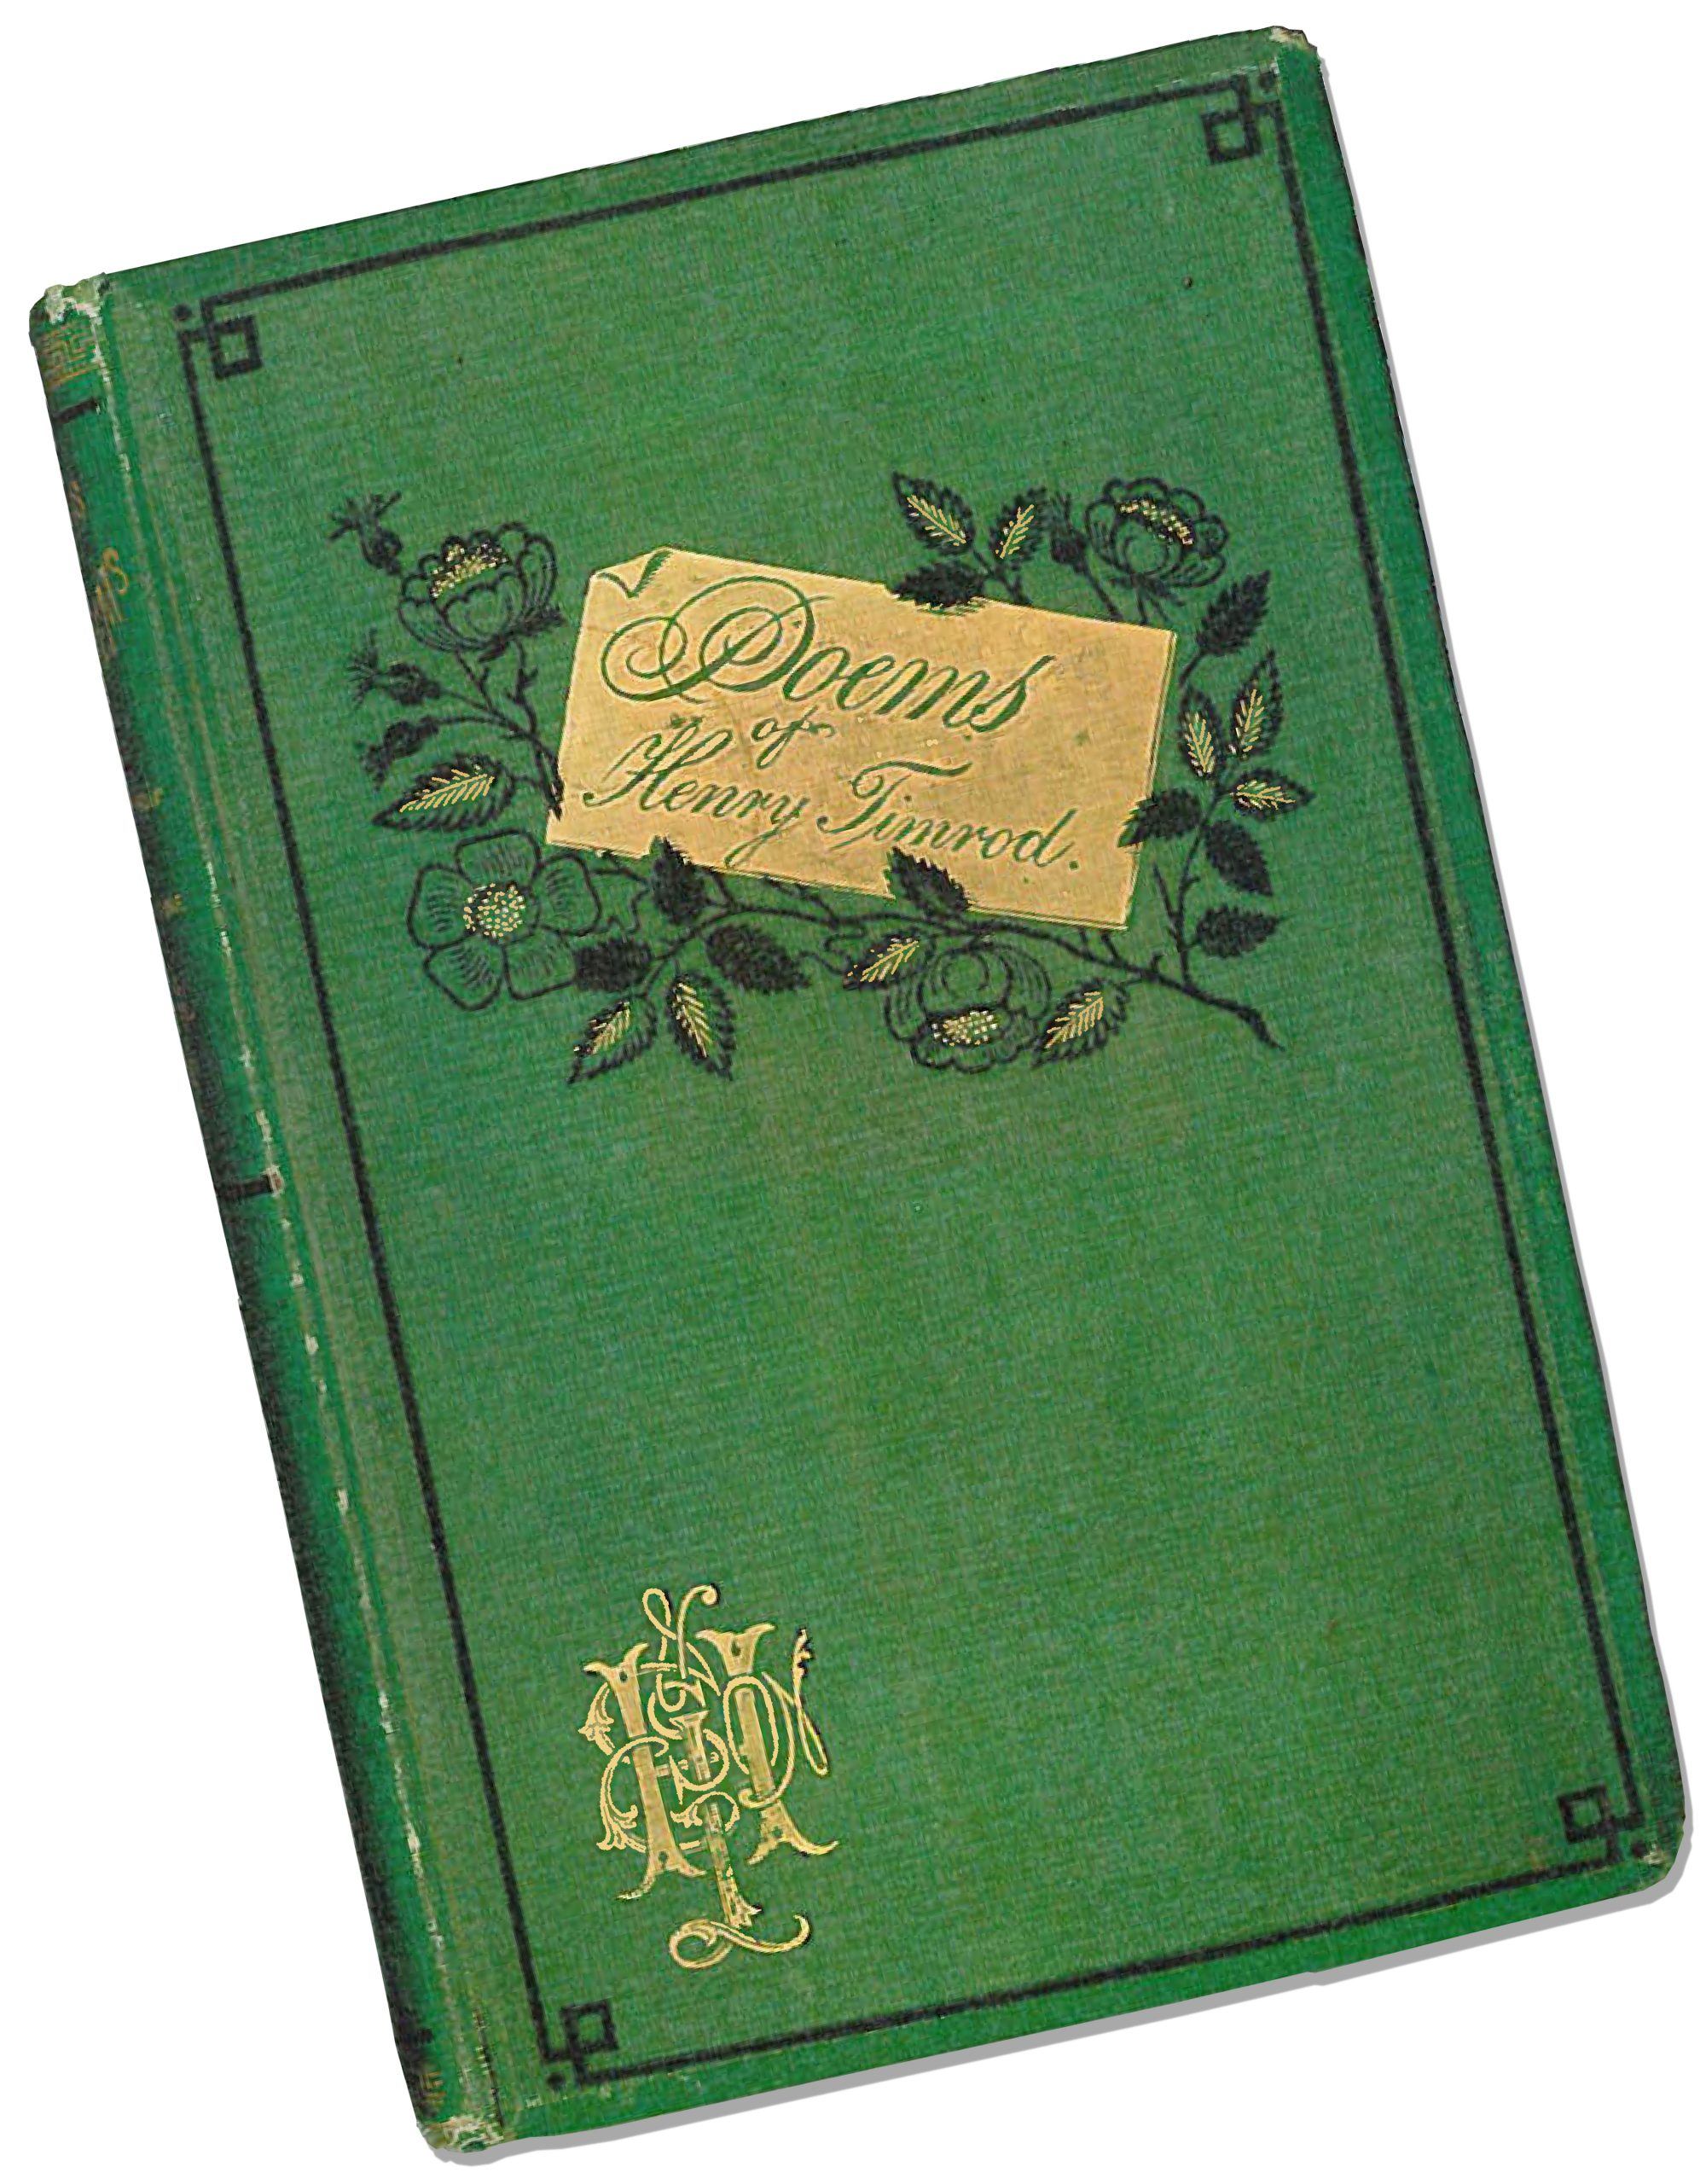 Cover of the 1873 edition of Paul Hamilton Hayne’s collection of Timrod’s Poems. From the collection of the author.